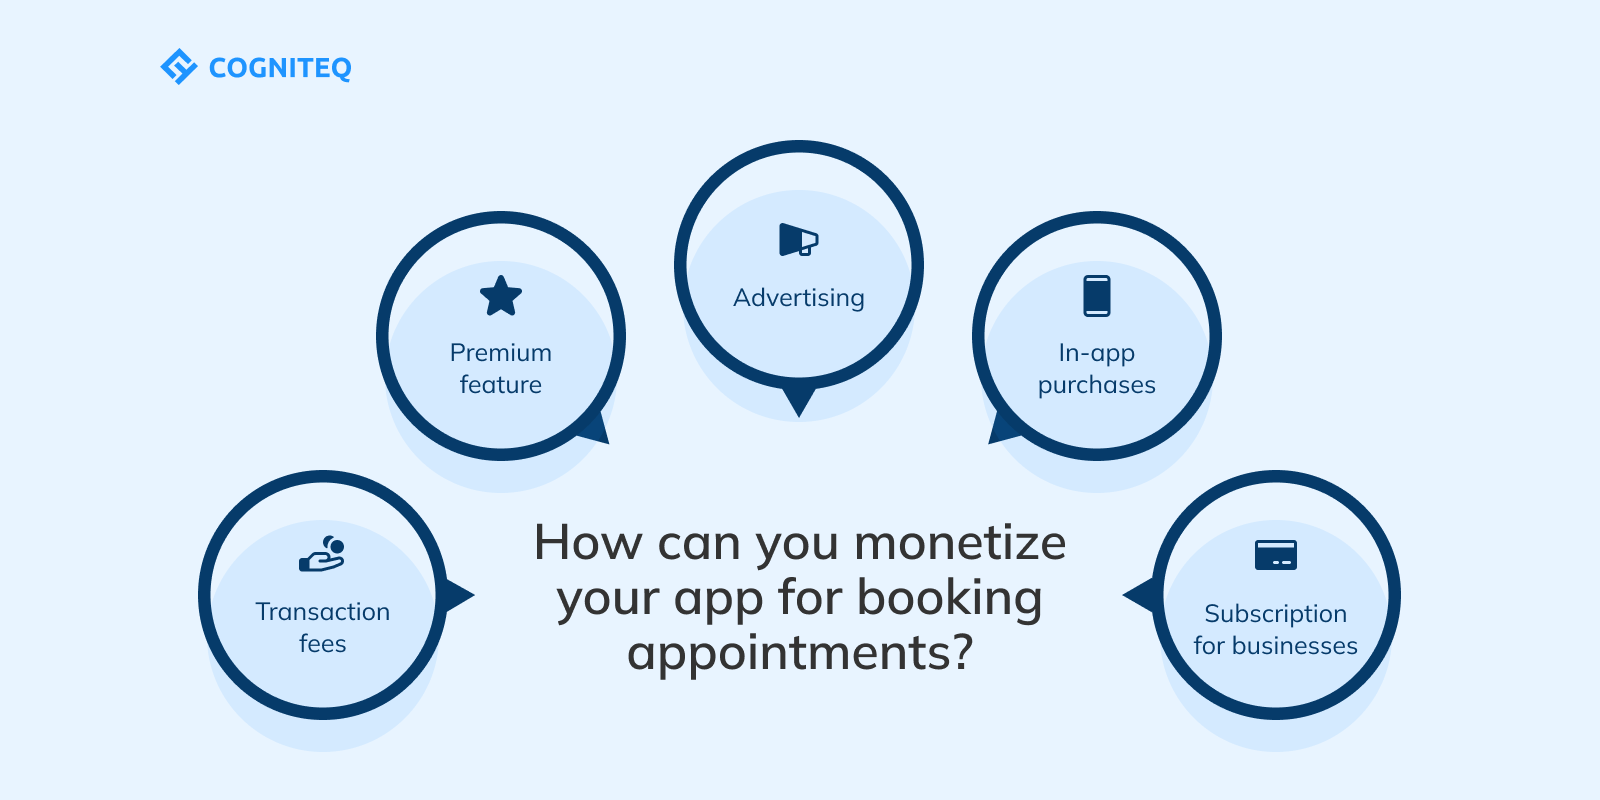 How can you monetize your app for booking appointments?